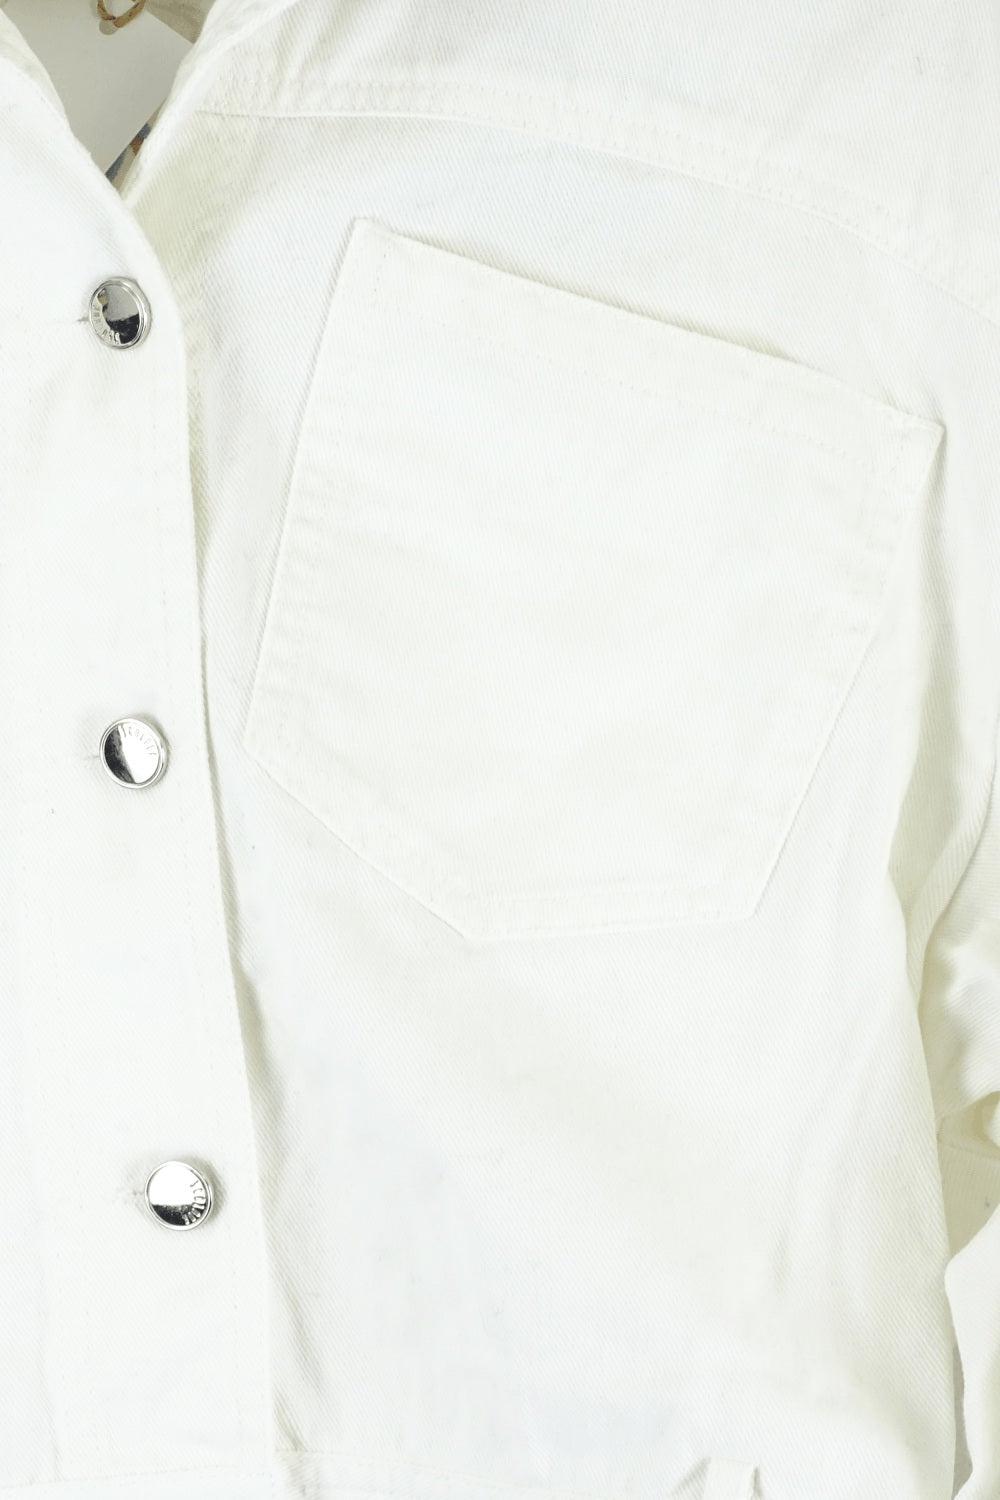 3 Colour White Denim Jacket With Embroidered Stitching  L